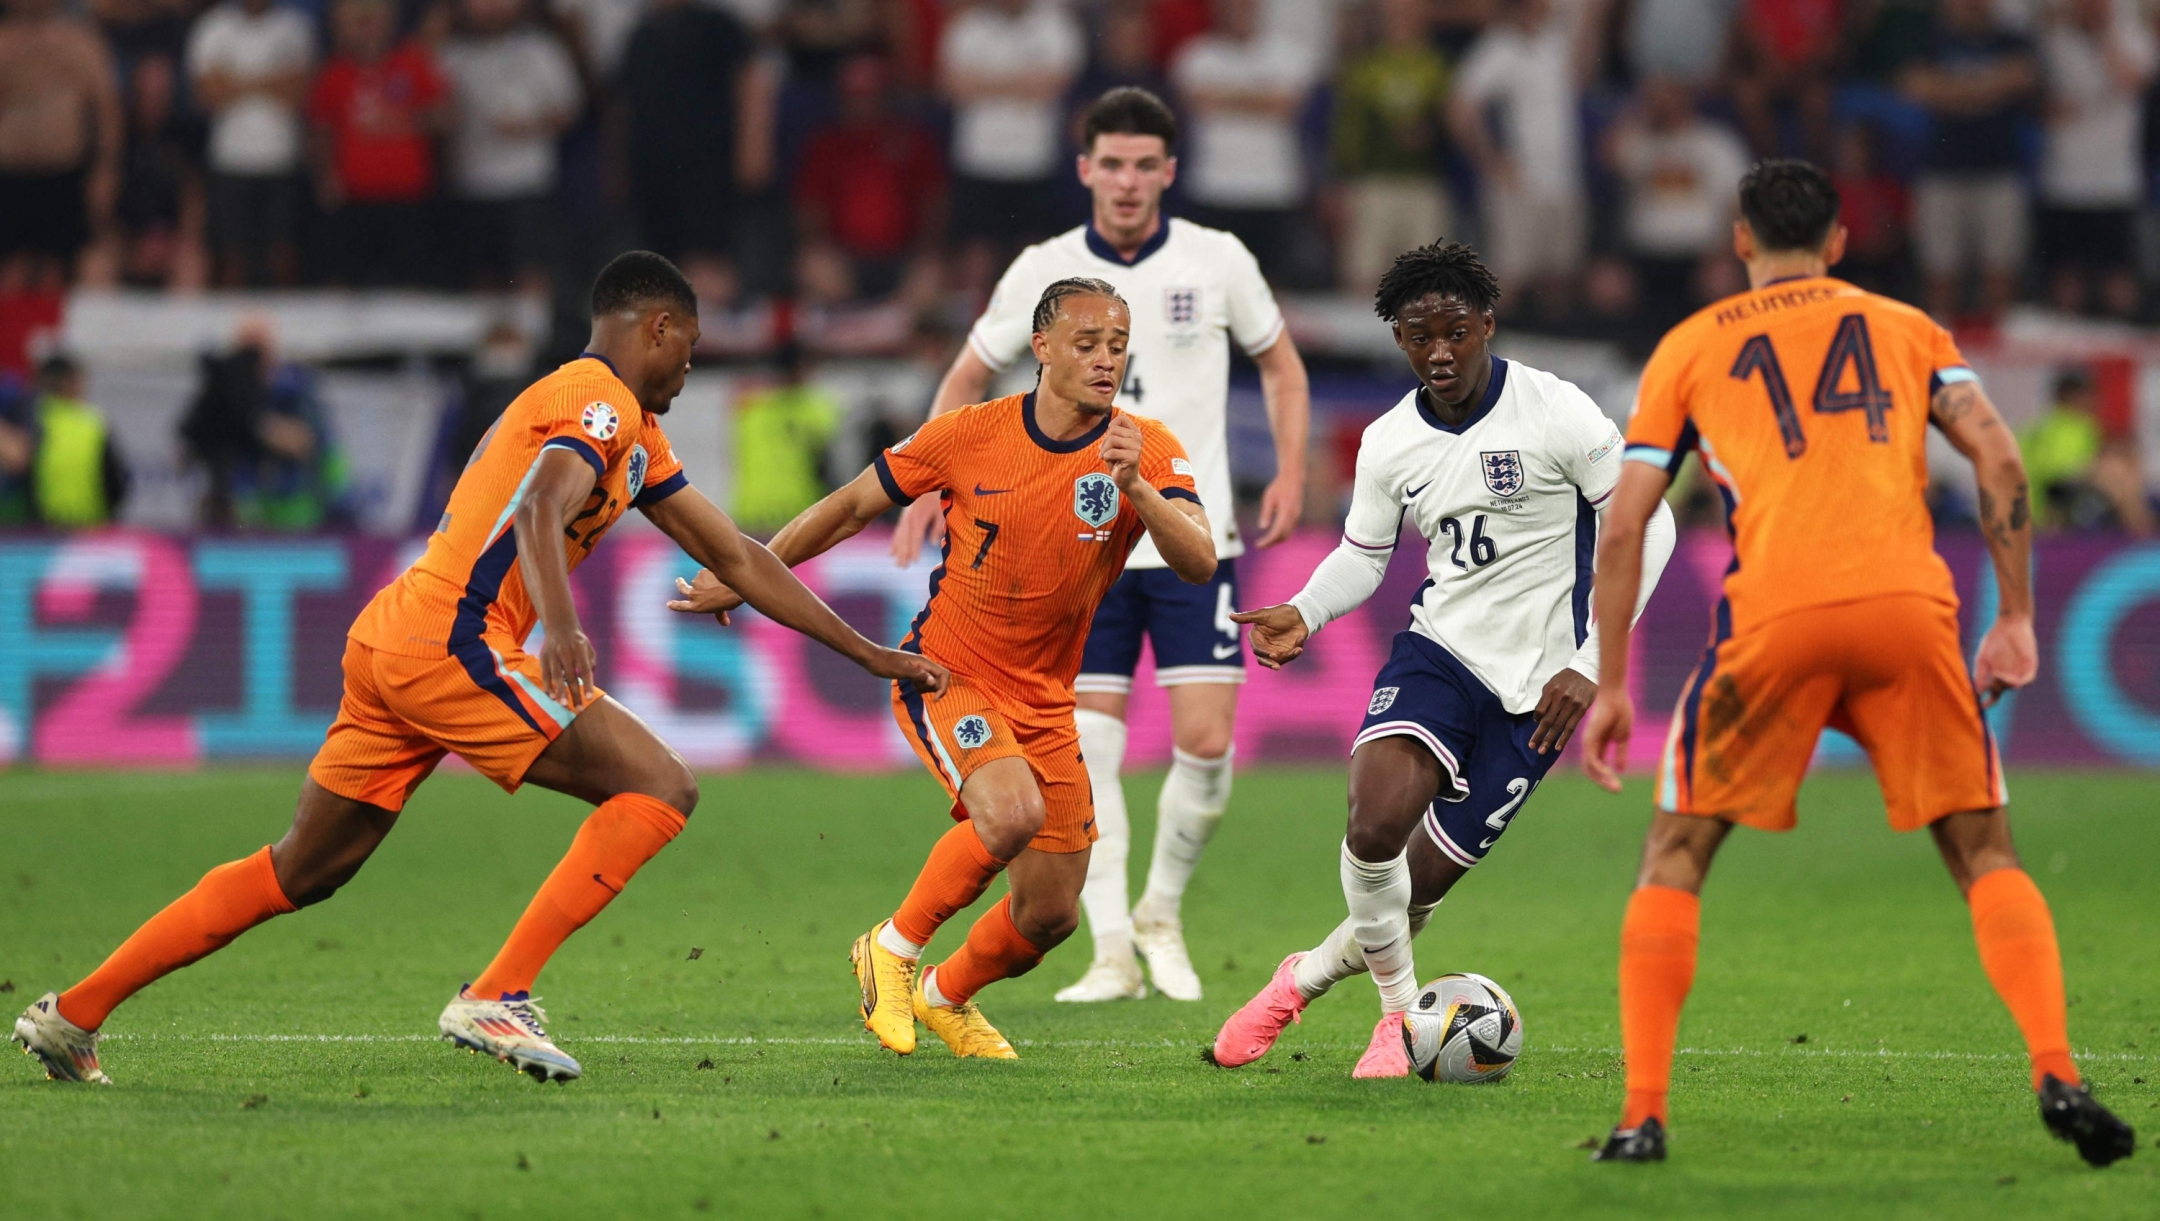 England's midfielder #26 Kobbie Mainoo (2nd R) fights for the ball with Netherlands' forward #07 Xavi Simons (2nd L) during the UEFA Euro 2024 semi-final football match between the Netherlands and England at the BVB Stadion in Dortmund on July 10, 2024. (Photo by Adrian DENNIS / AFP)